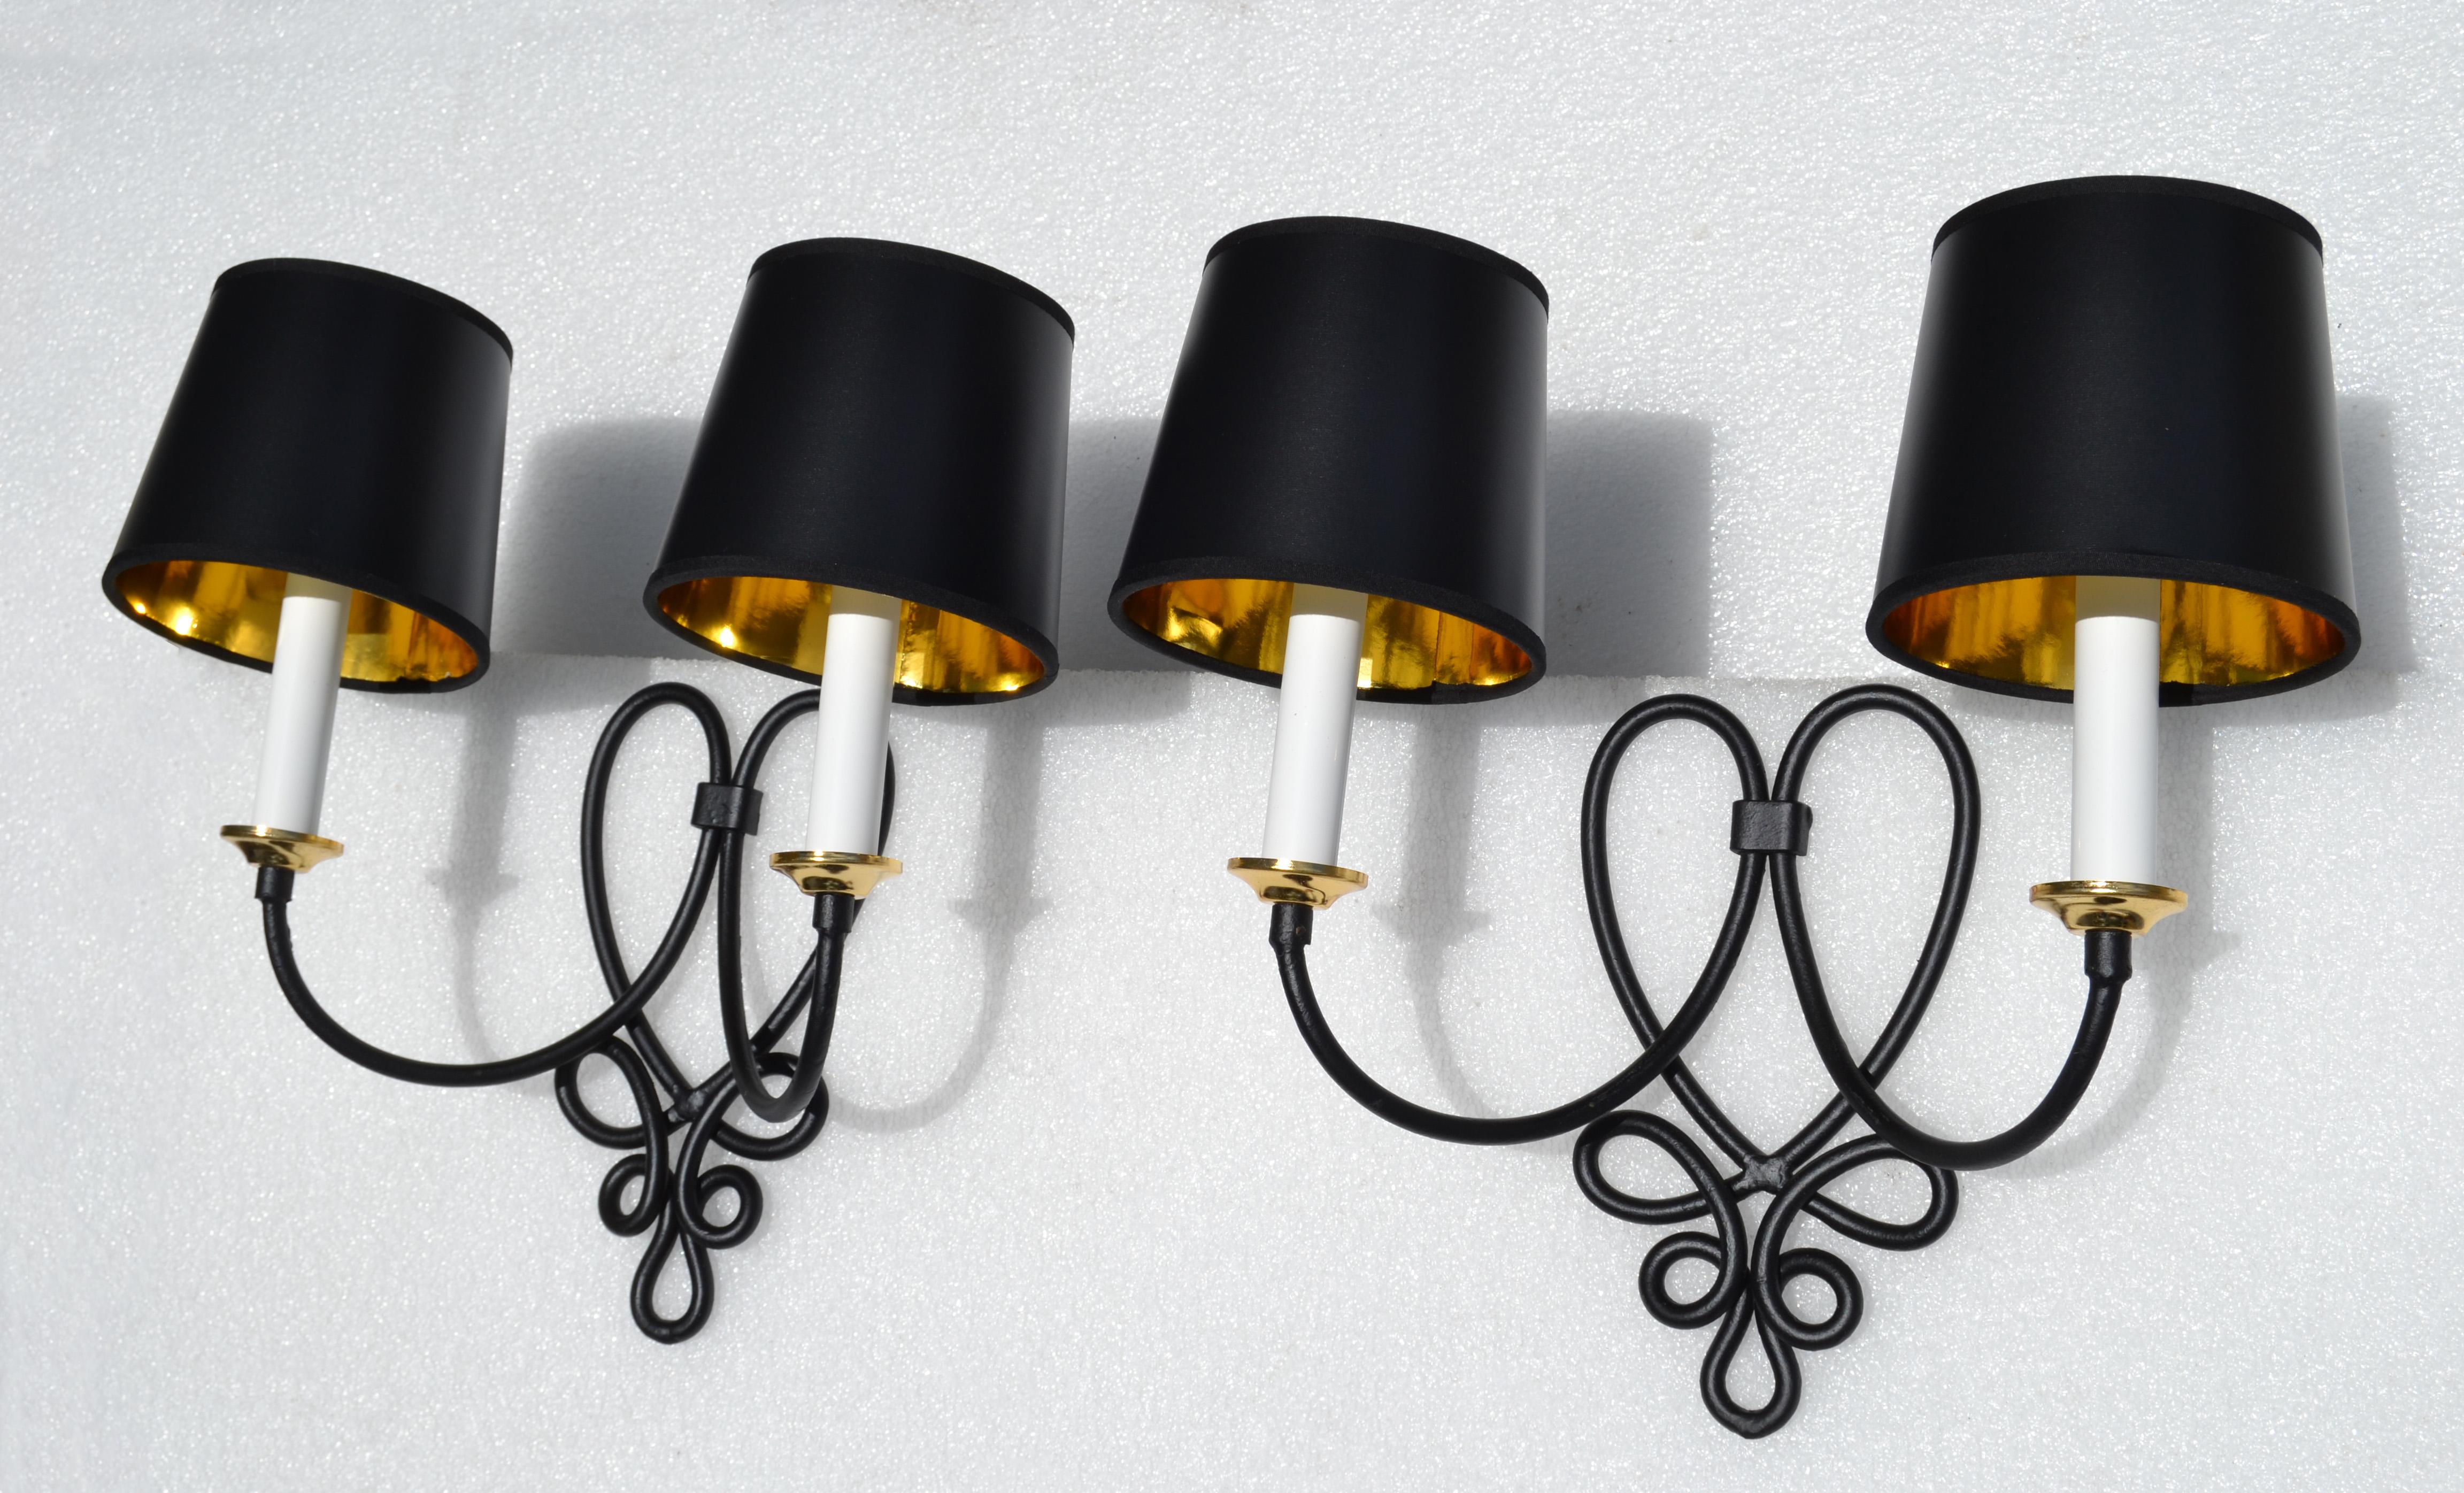 Pair, Rene Prou French 2 Lights Wrought Iron & Brass Wall Sconces Black Finish In Good Condition For Sale In Miami, FL